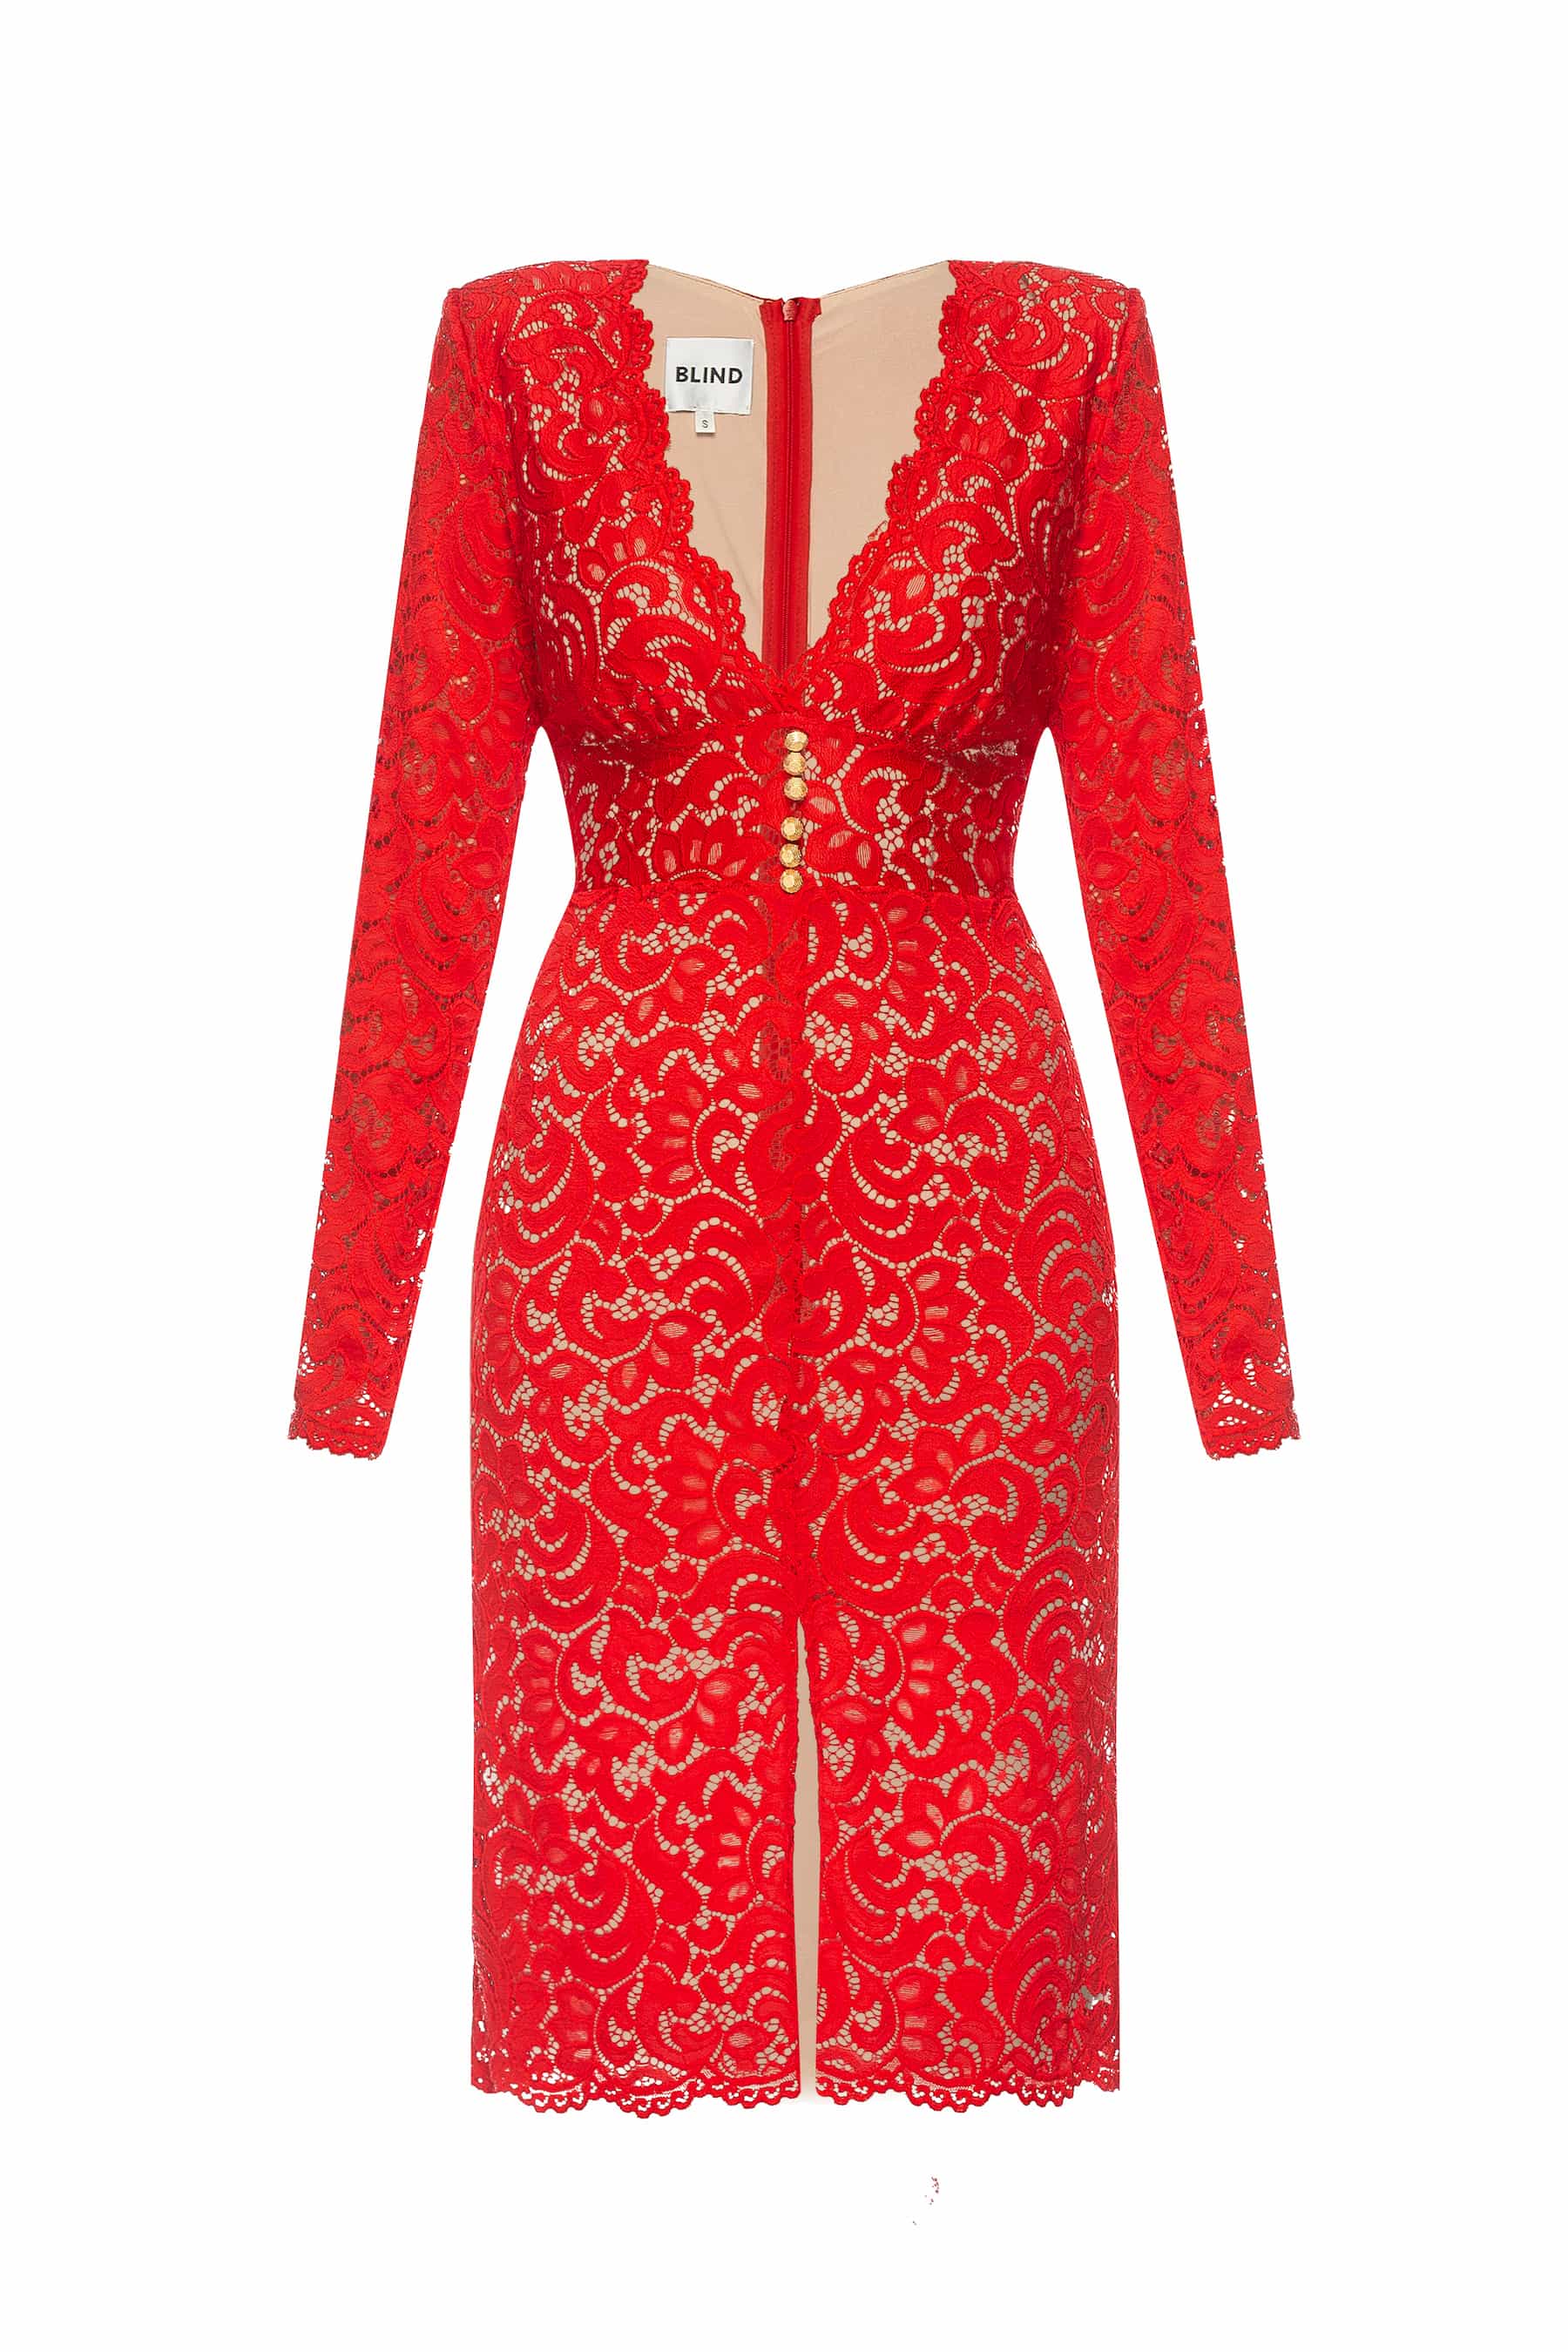 Red sheath dress with lace and gold buttons